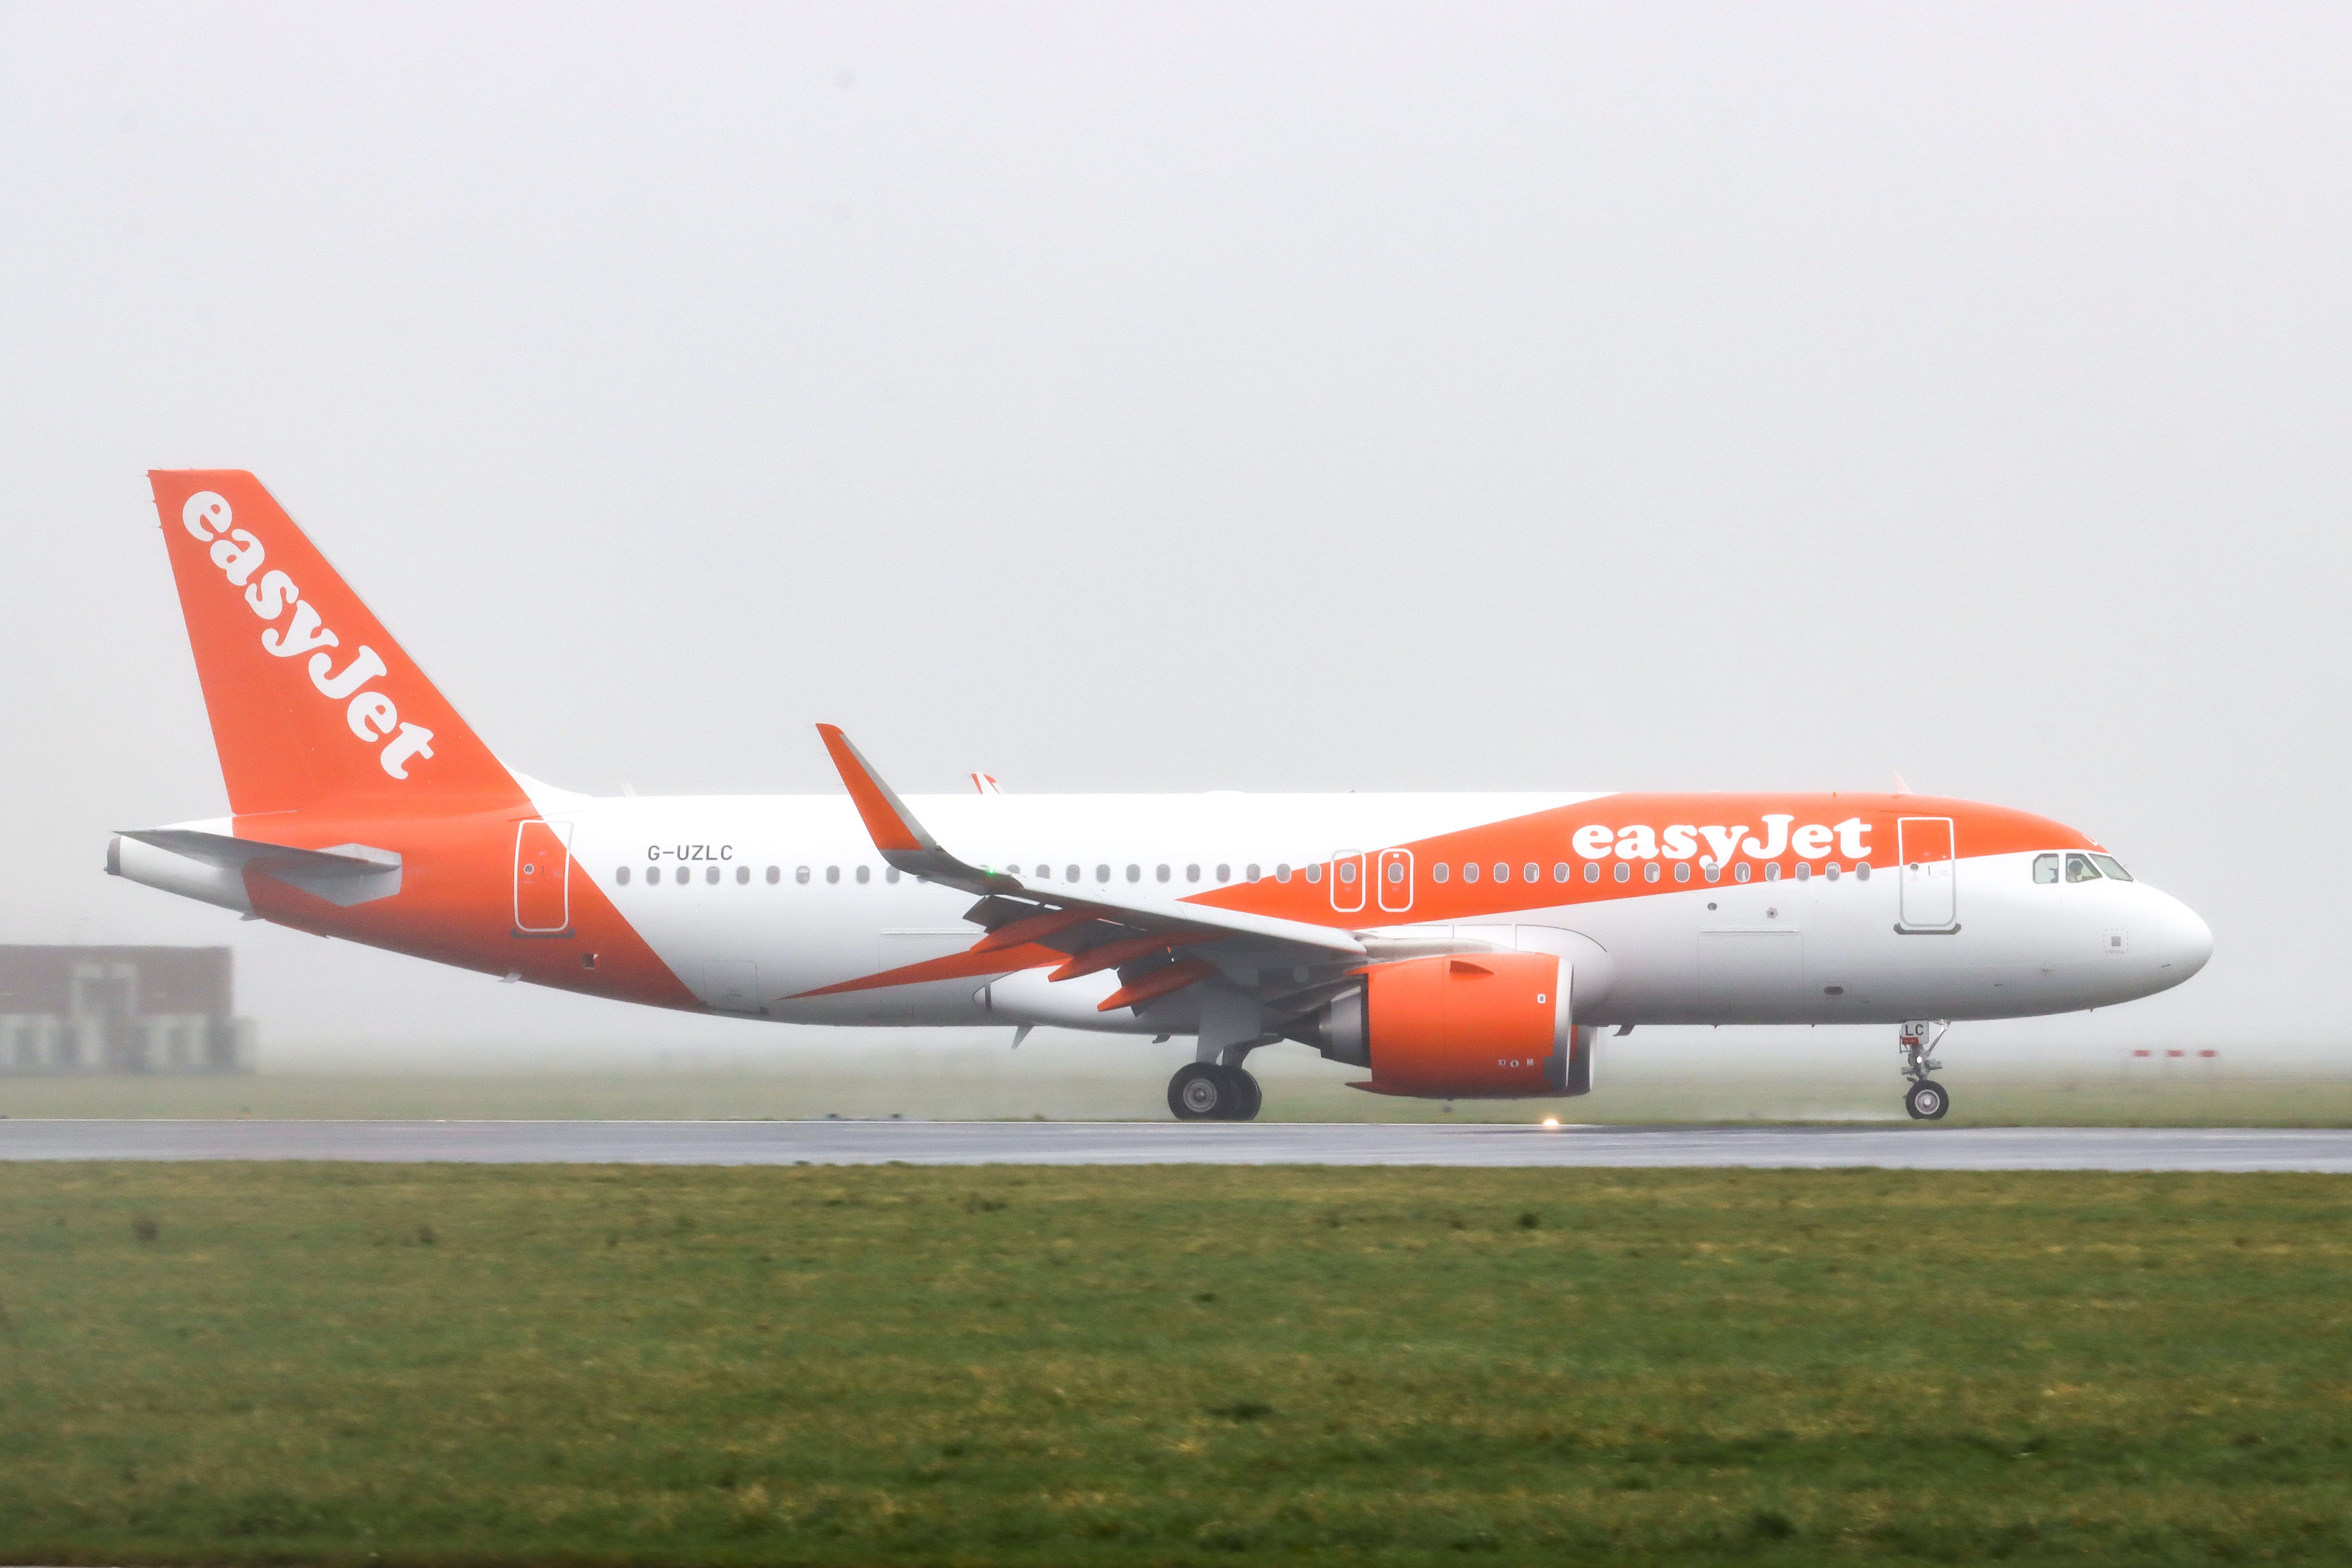 easyJet Airbus A320neo on taxiway